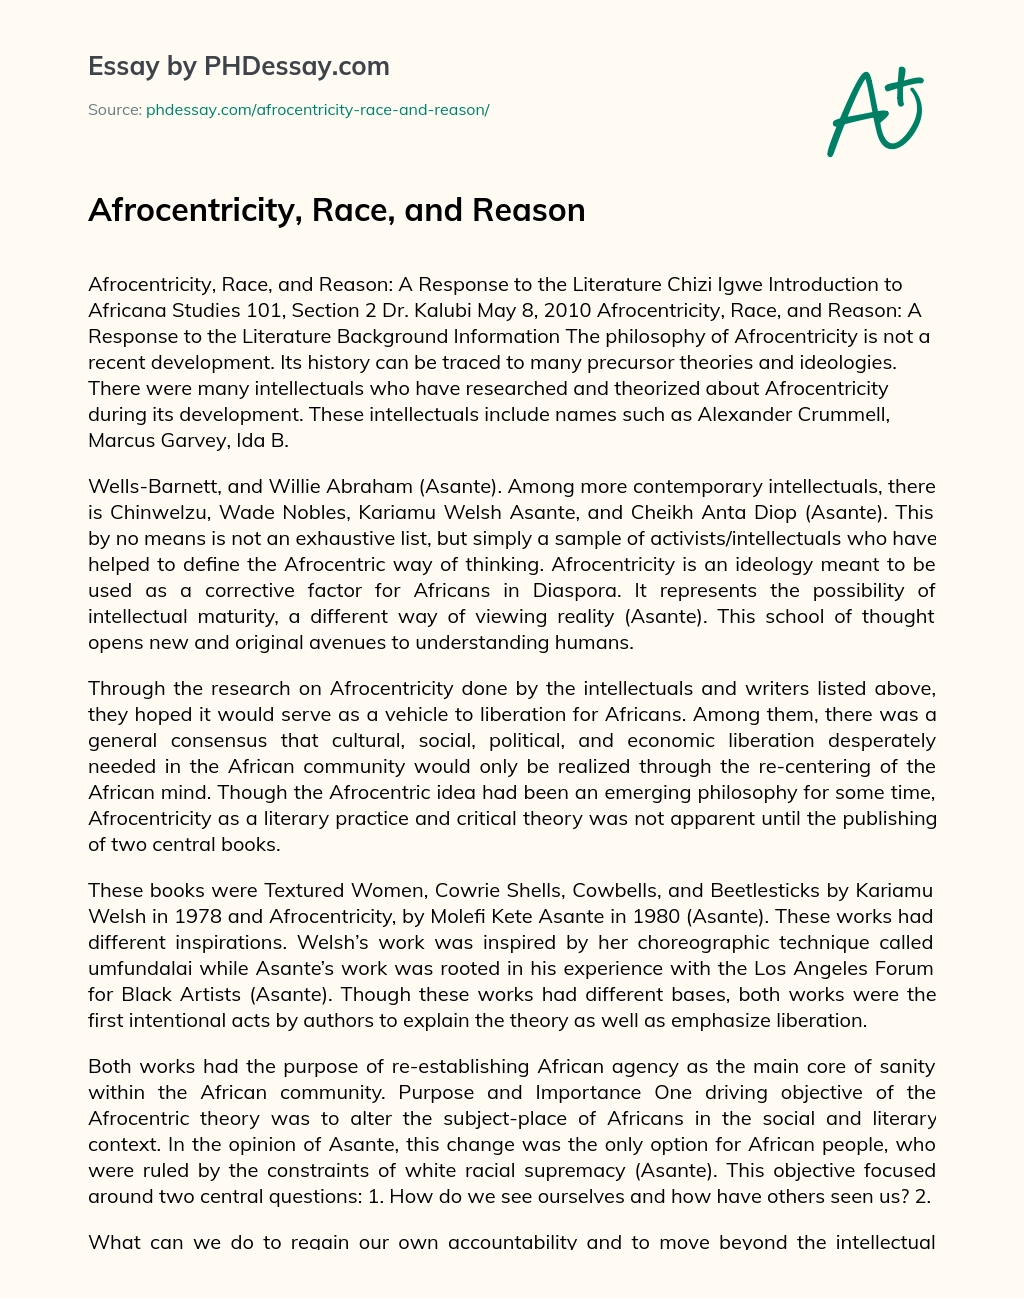 Afrocentricity, Race, and Reason essay